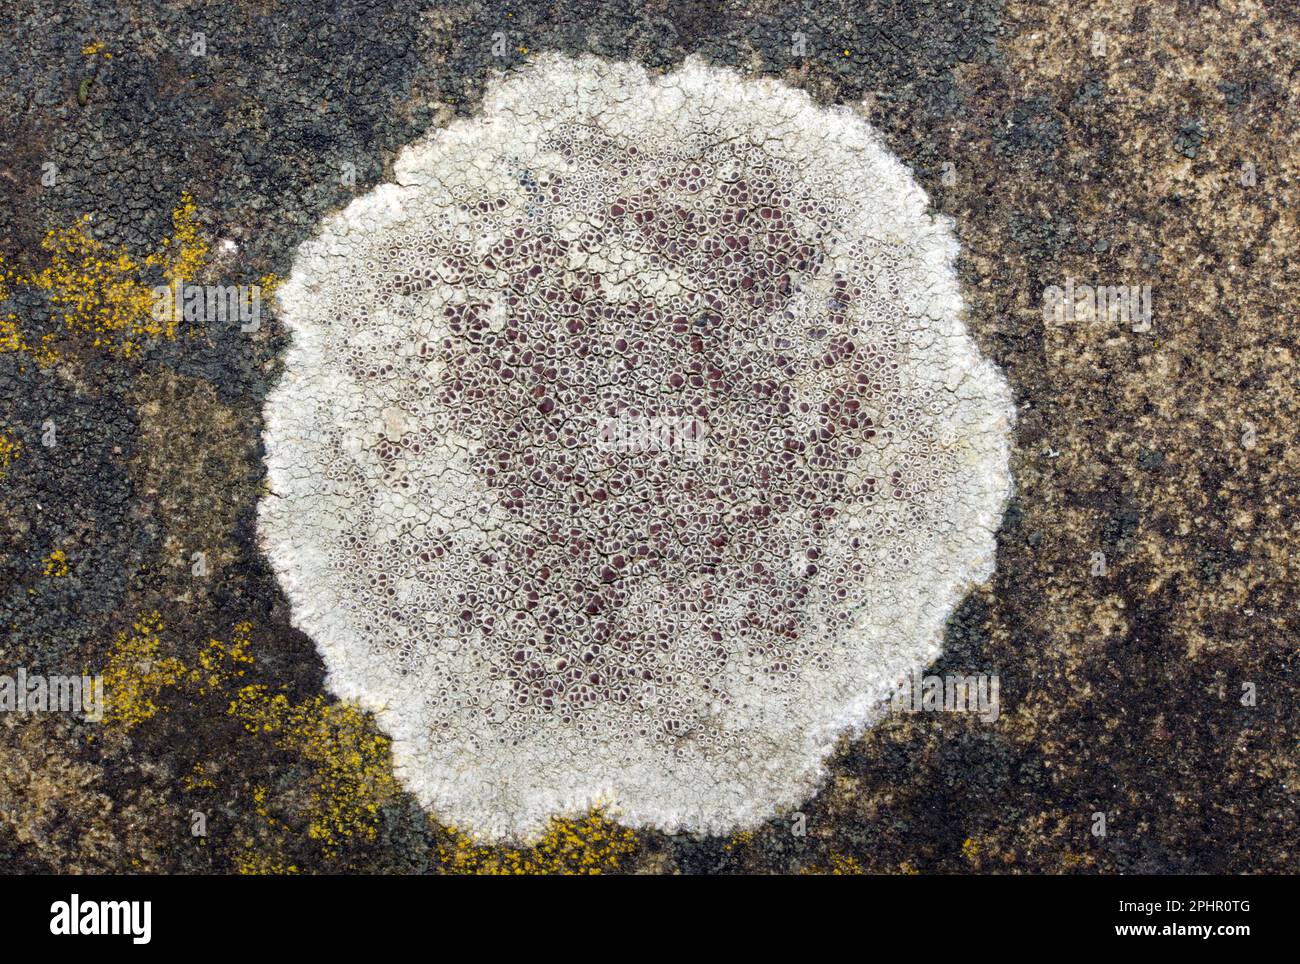 Lecanora campestris is a crustose lichen found on calcareous stone and walls, nutrient-enriched acidic rocks and asphalt. It is widespread in the UK. Stock Photo